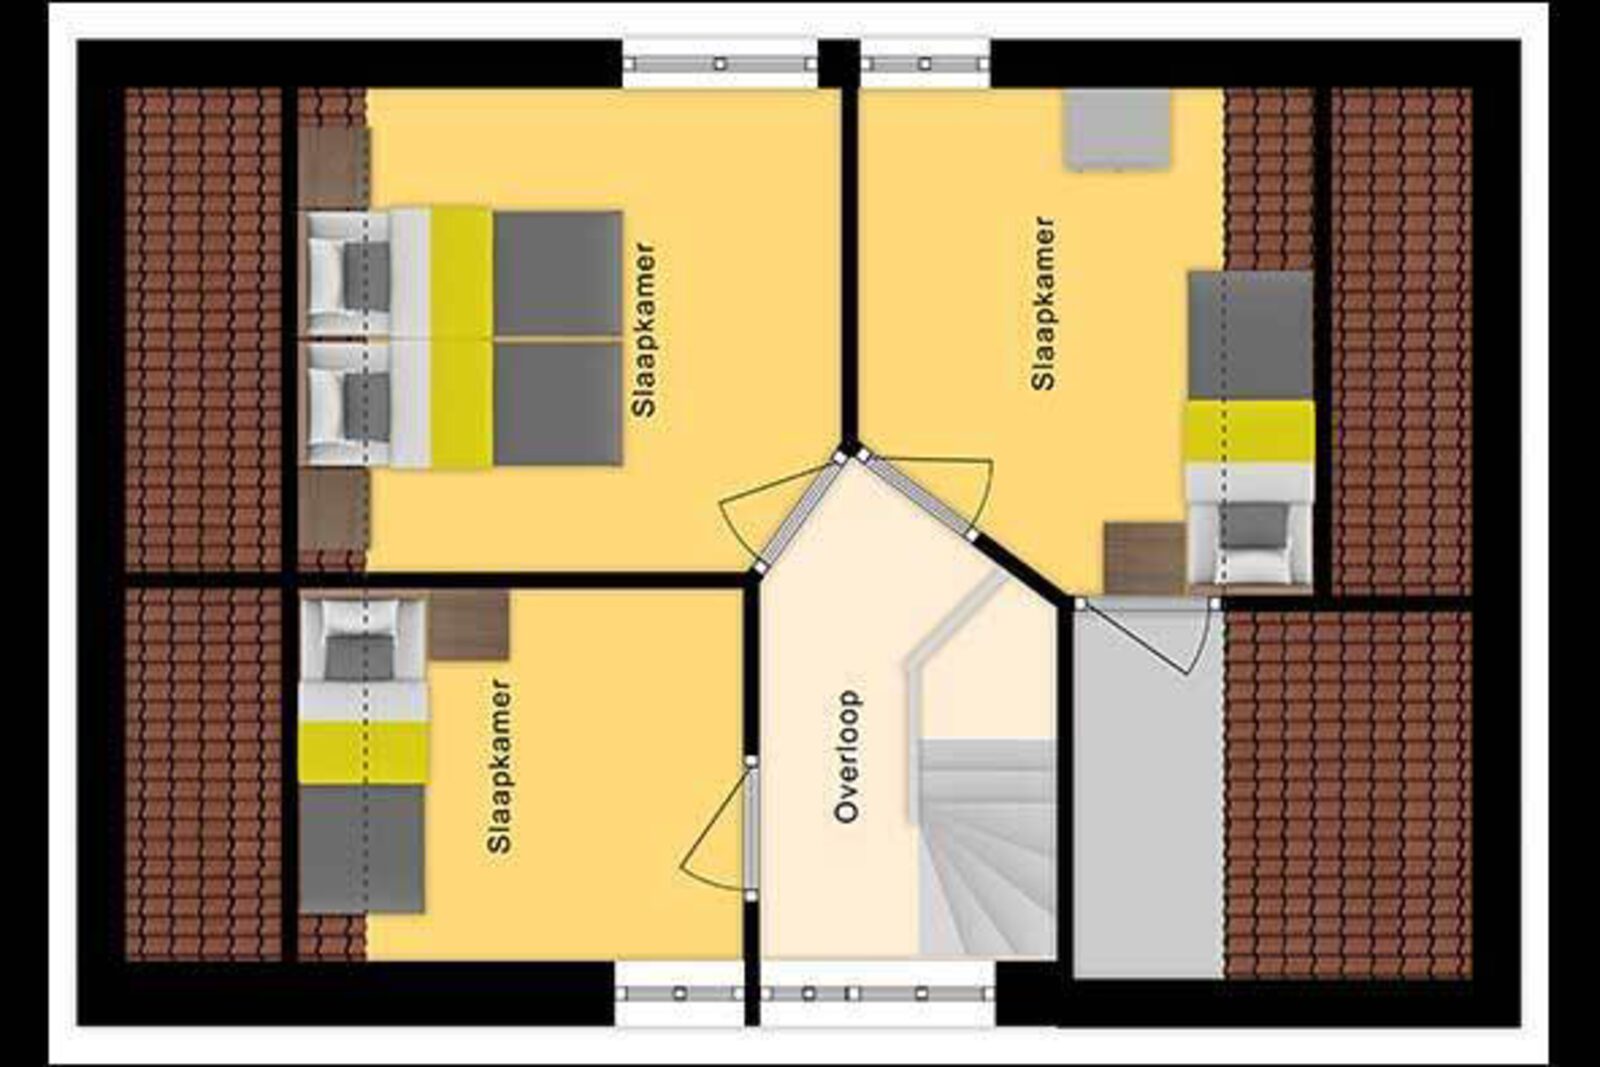 Bungalow Senior with bedroom on first floor - 6 Persons